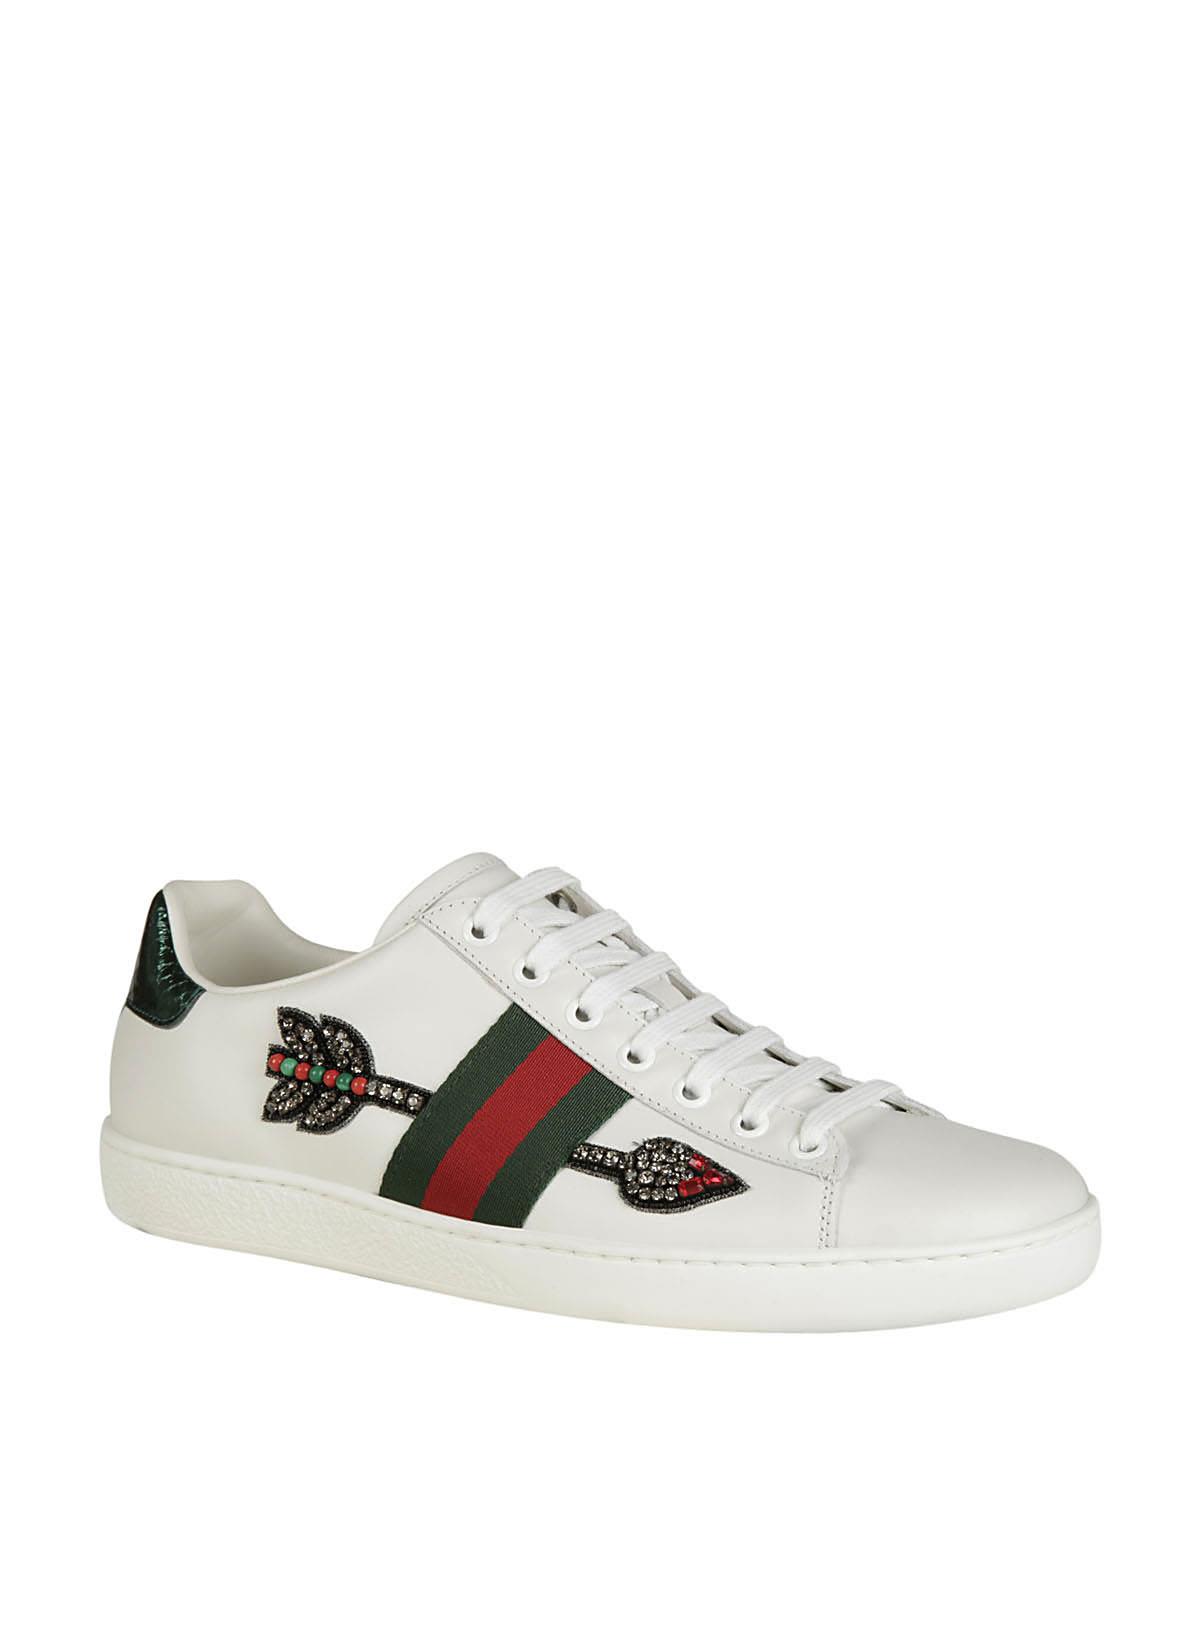 GUCCI New Ace Arrow-Embroidered Leather Trainers in White | ModeSens